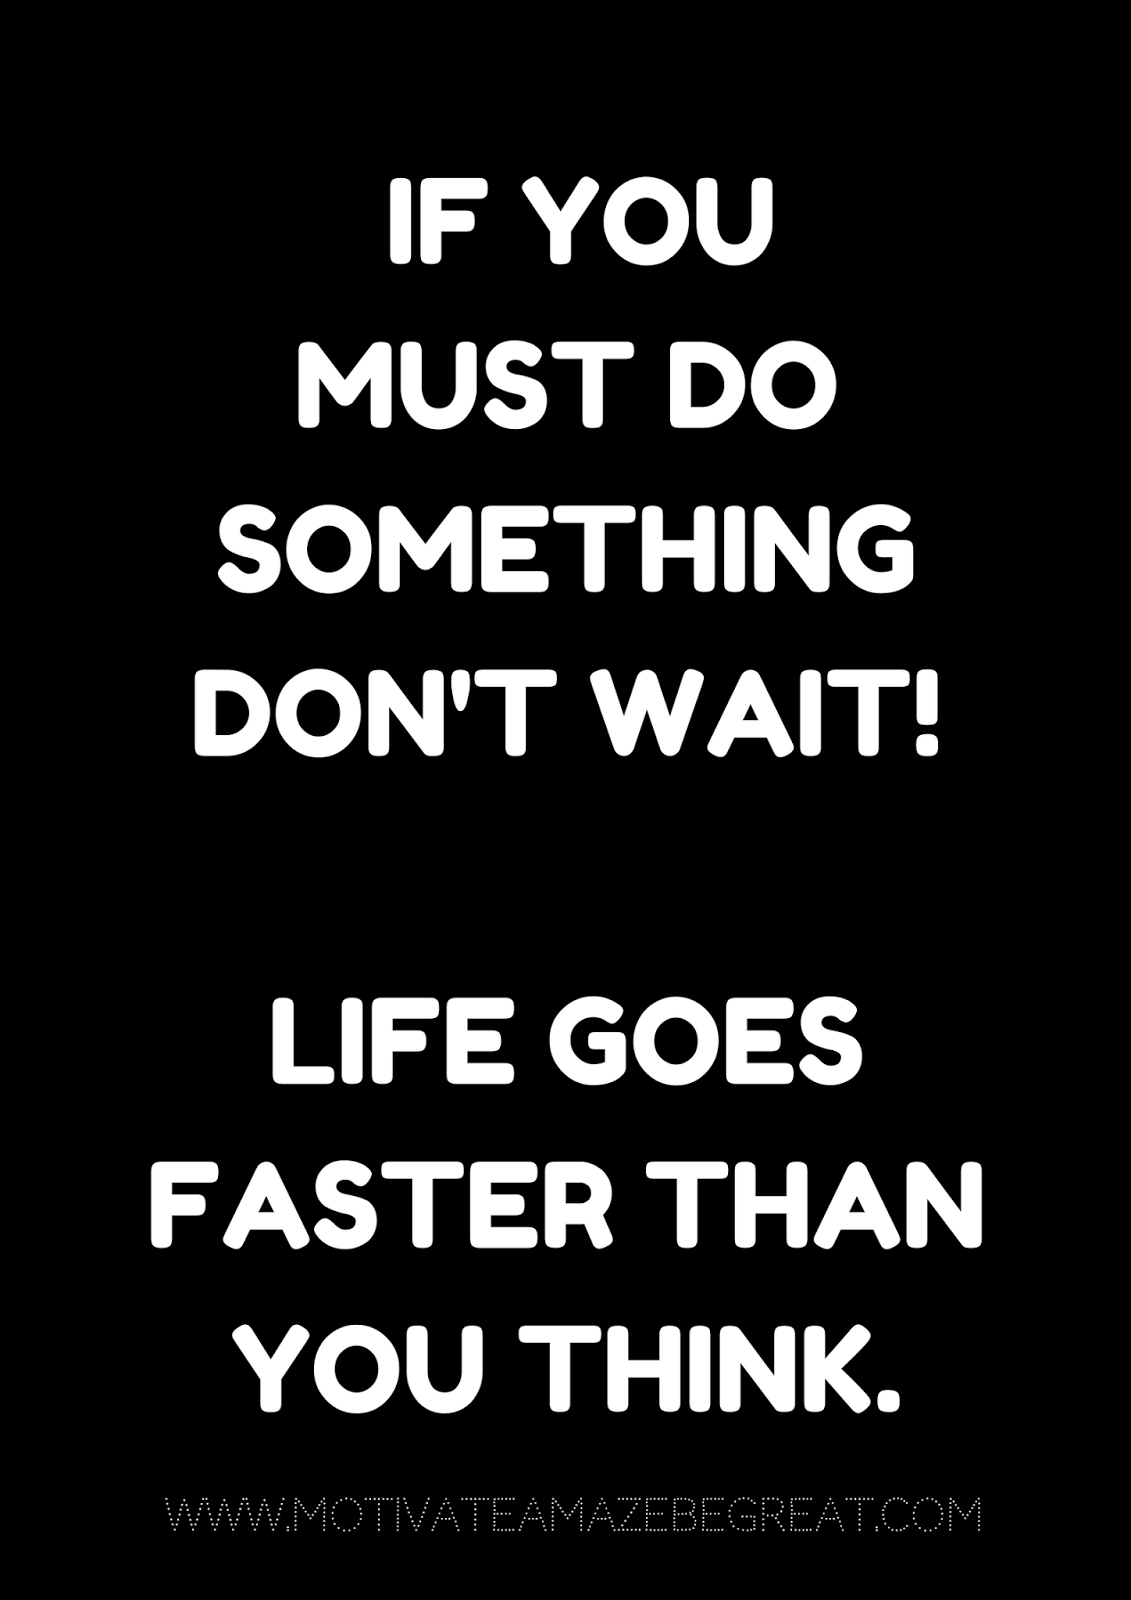 27 Self Motivation Quotes And Posters For Success "If you must do something don